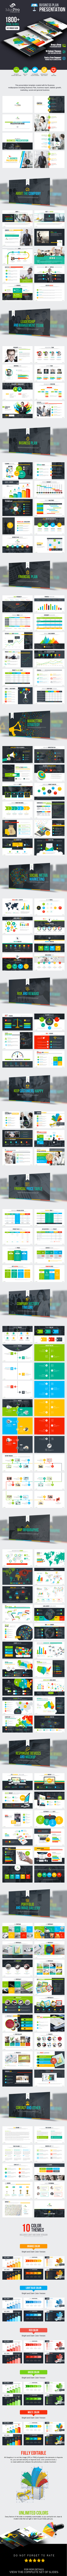 business plans & presentations Business plan template Keynote marketing plan marketing strategy Powerpoint presentation animated presentation Presentation Slide science fair projects graphicriver presentation good science fair